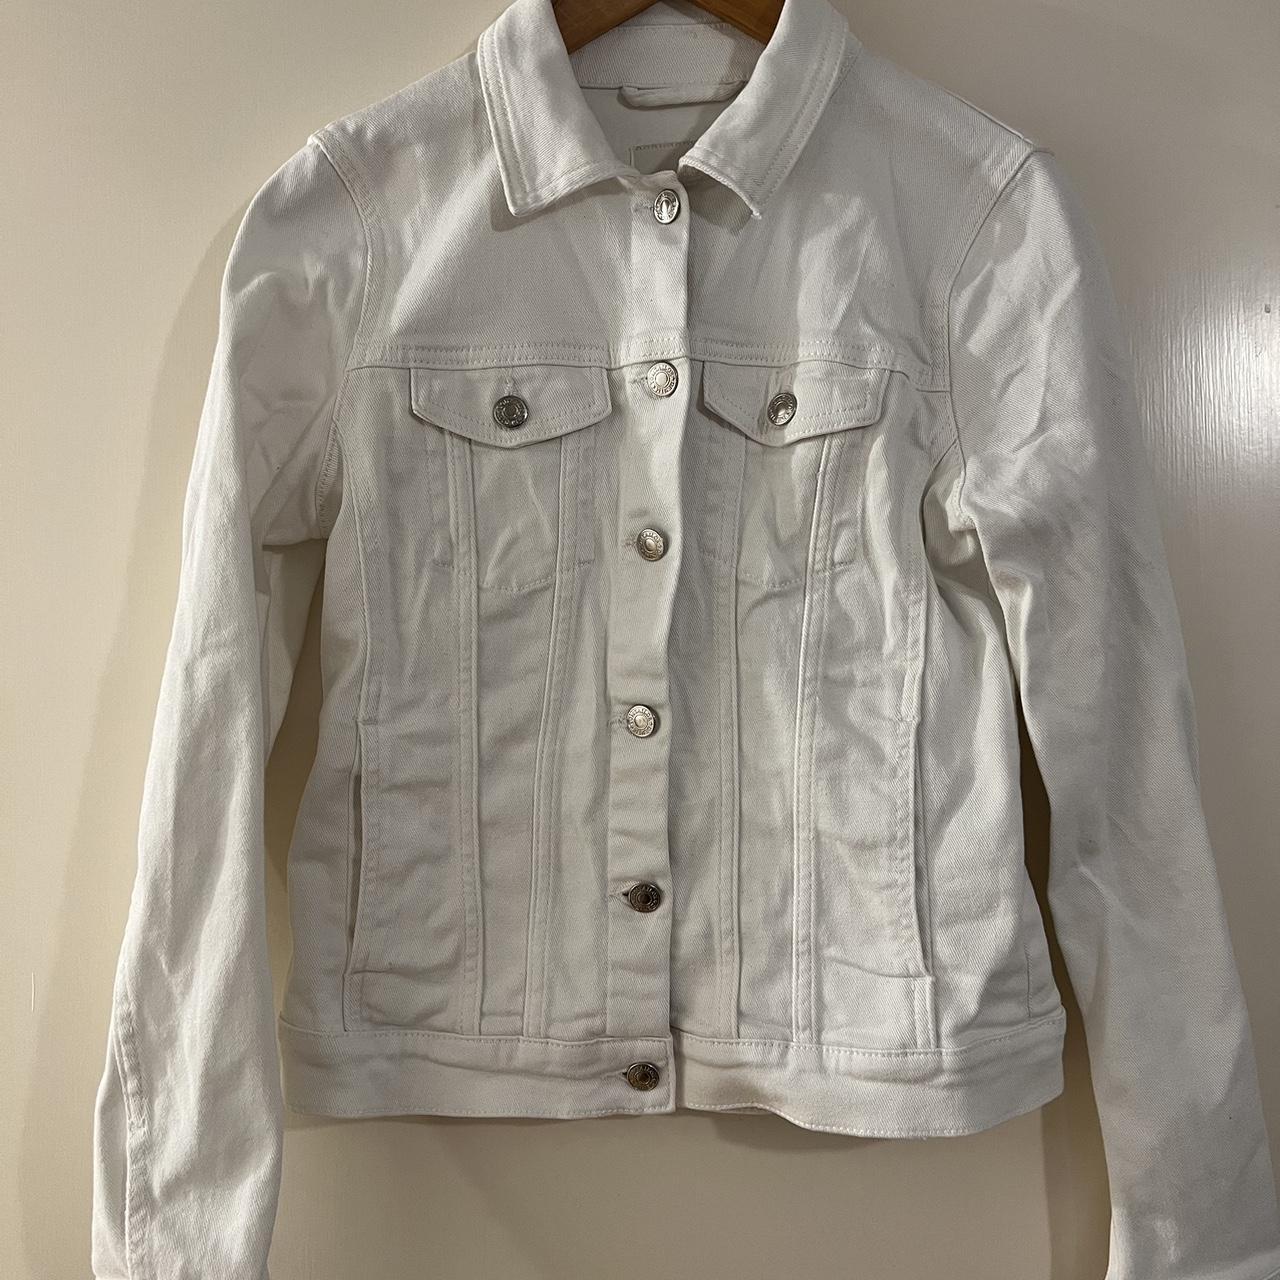 Tom Tailor button front denim jacket in white - BTR - BEYOND THE RACK